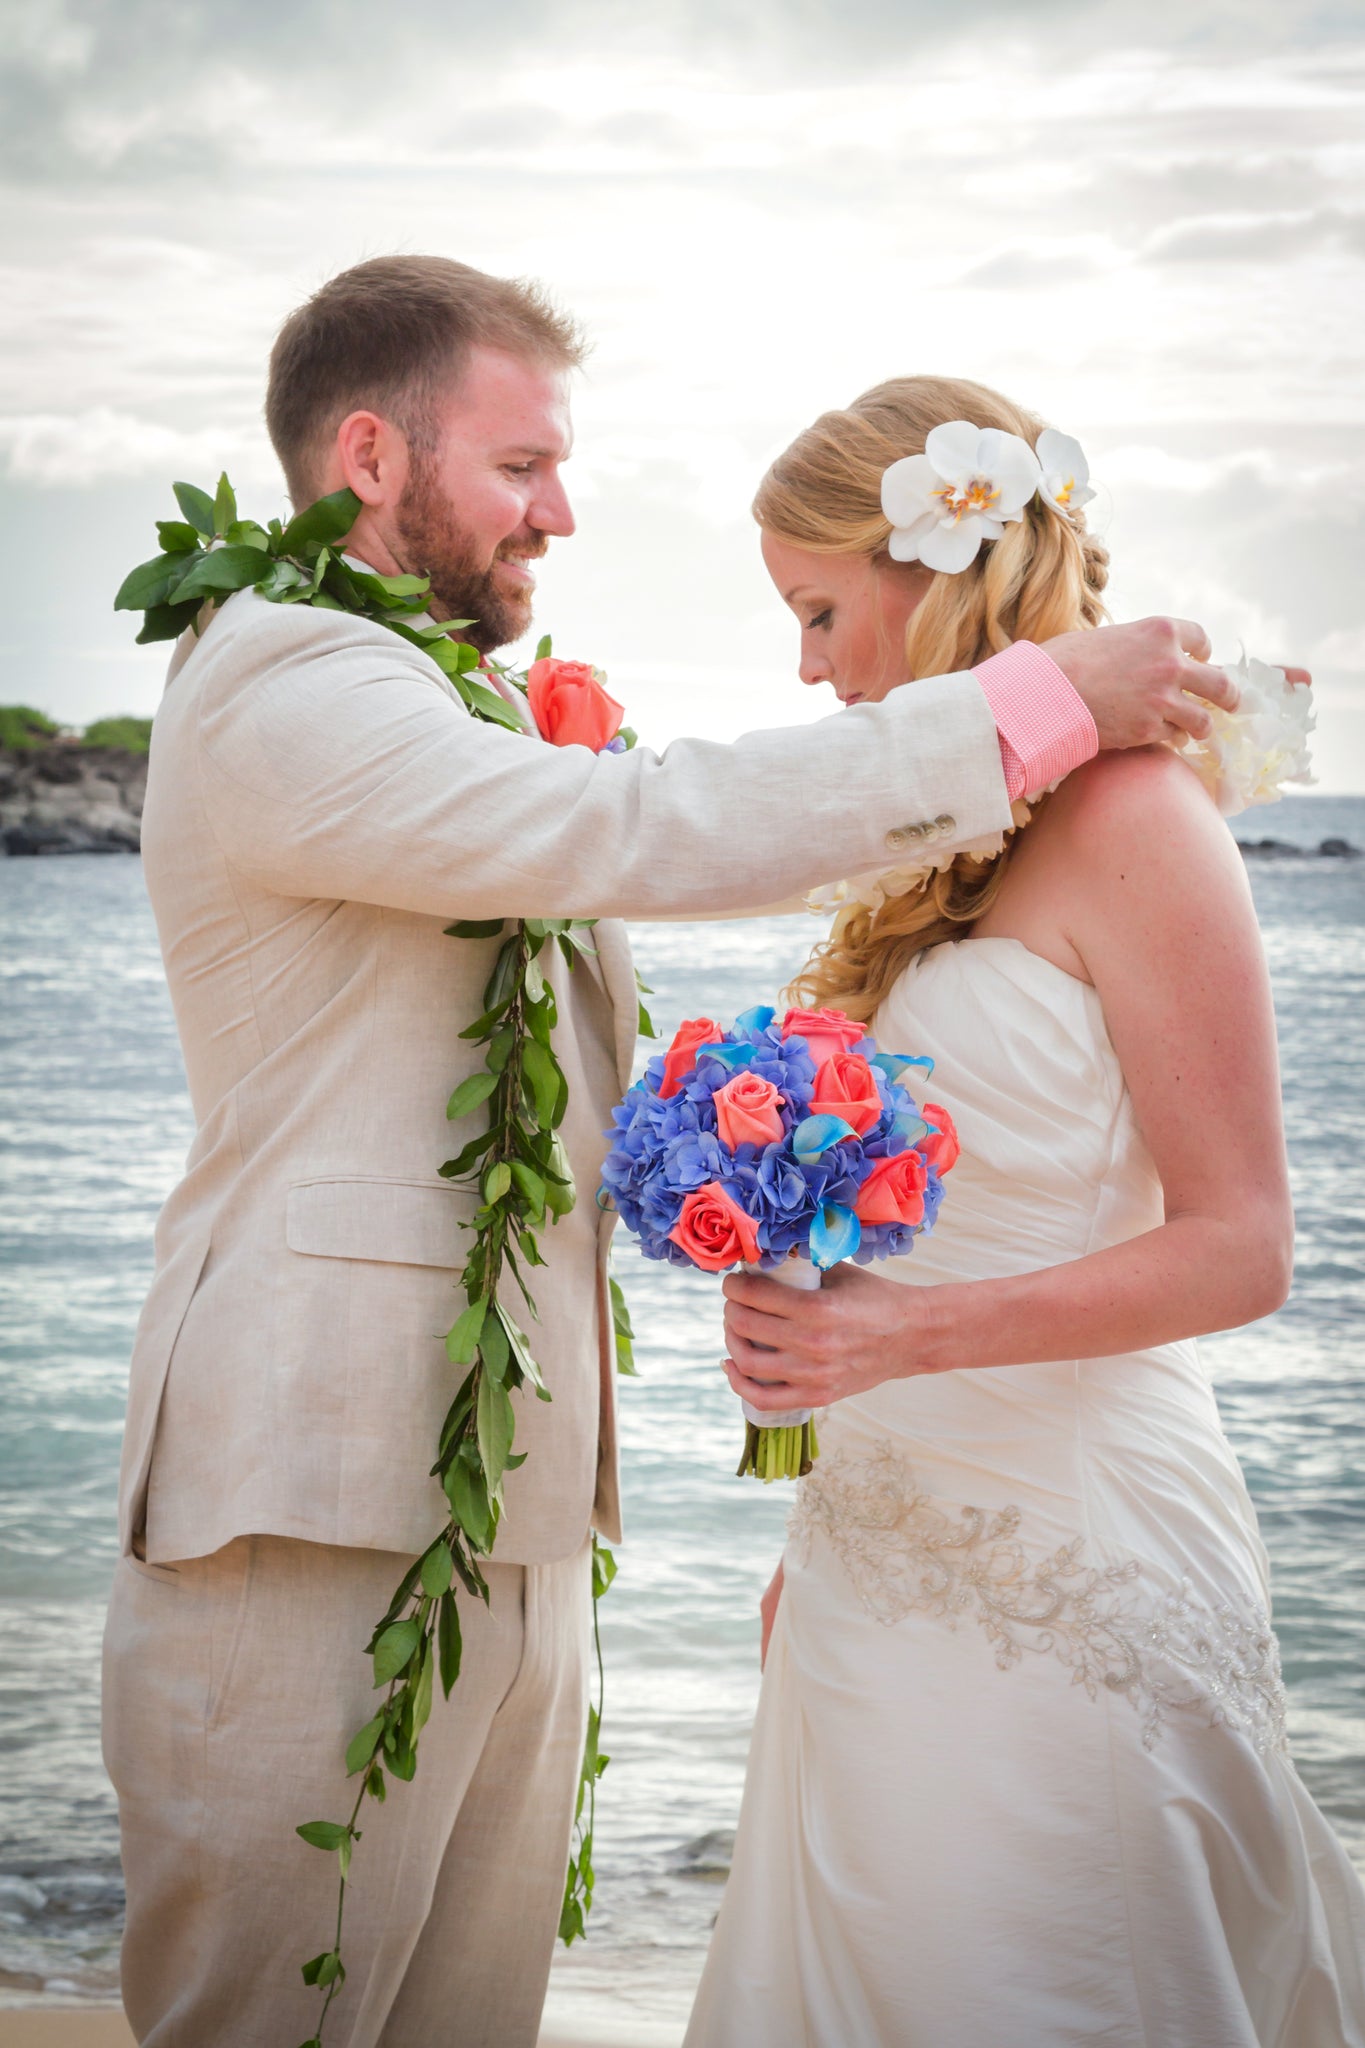 Groom lei's his new Wife in Hawaii tradition